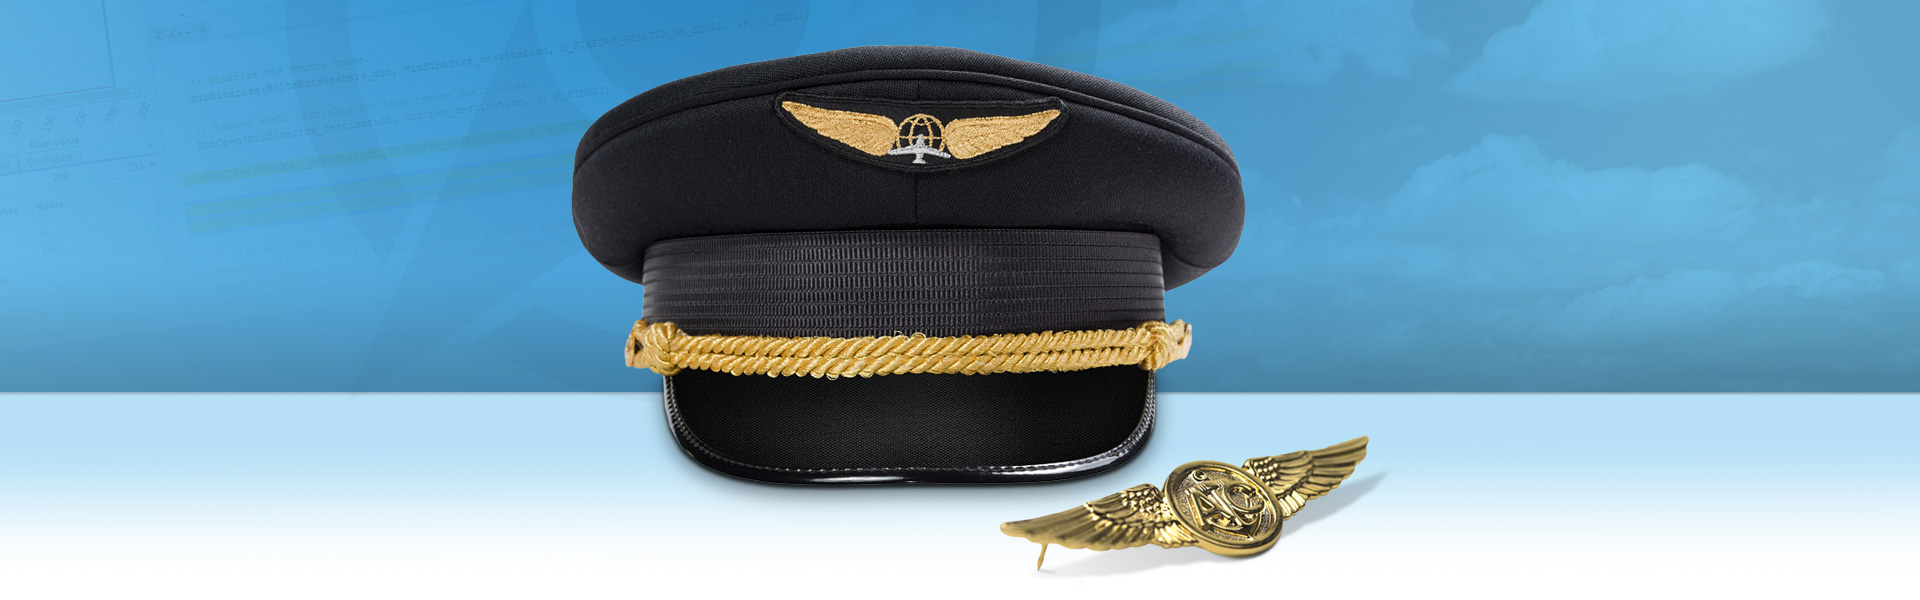 Pilot hat and badge on blue background